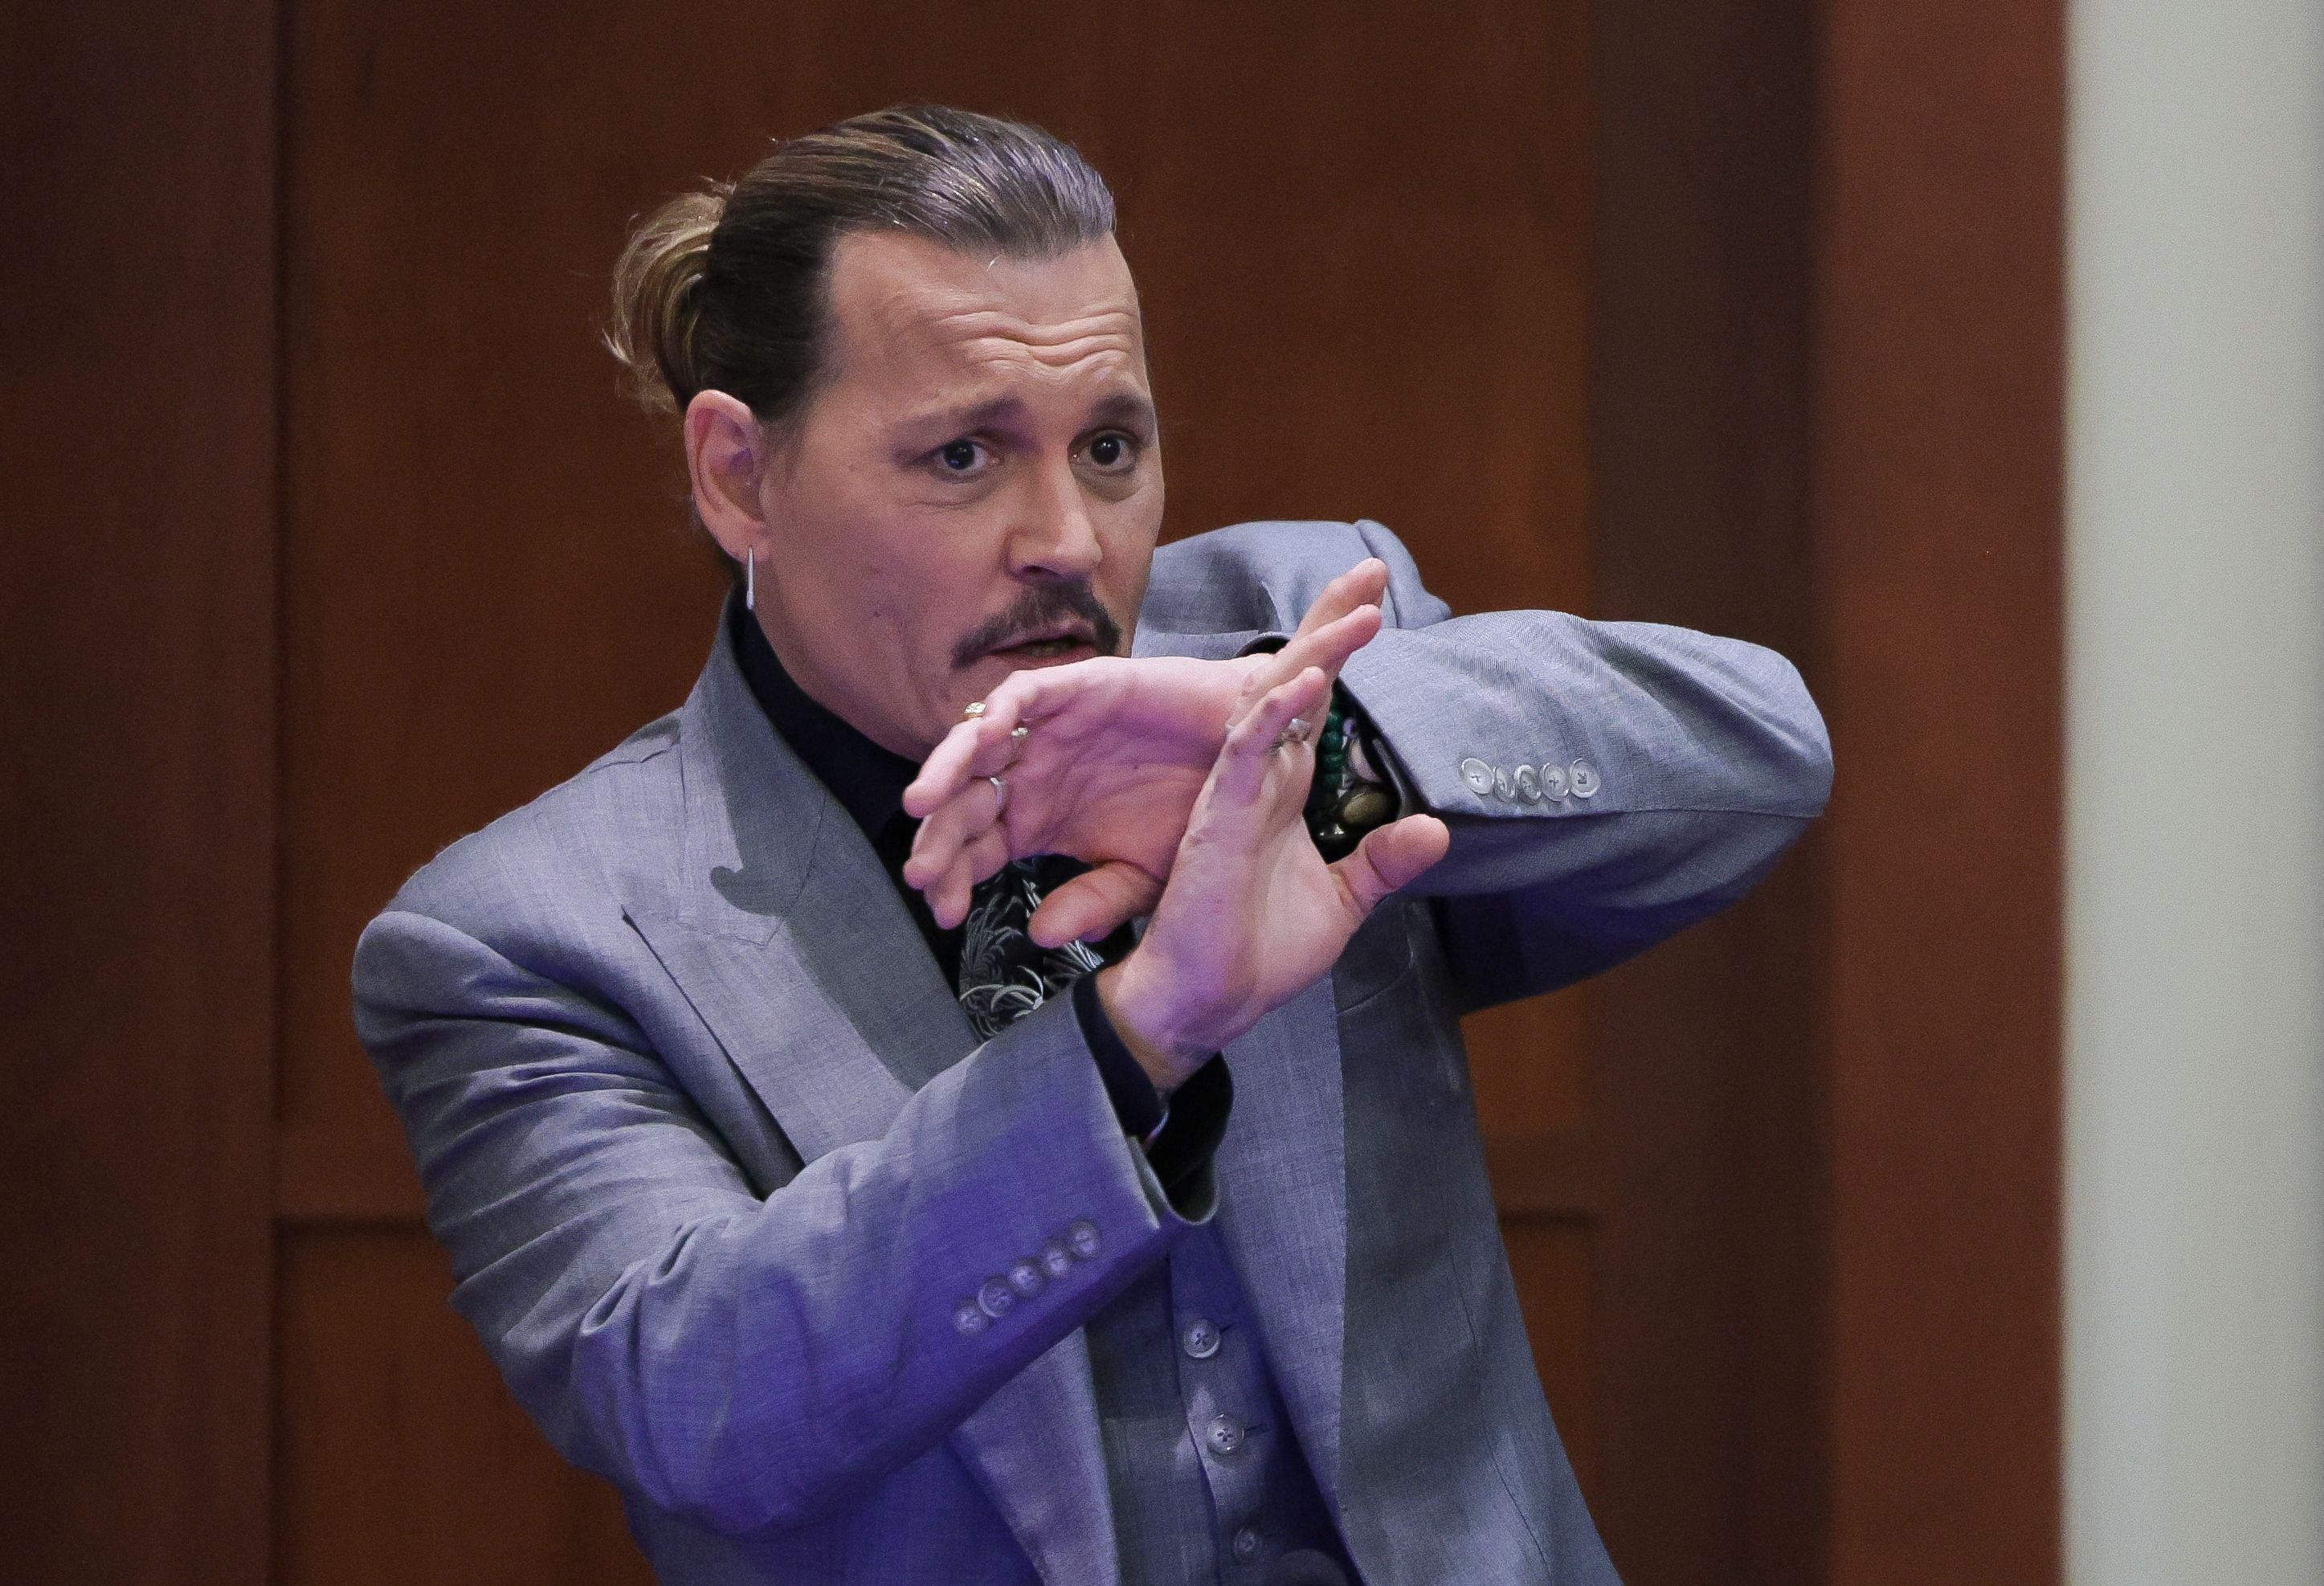 Johnny Depp demonstrates in court how he says he shielded himself from an alleged attack by his ex-wife Amber Heard